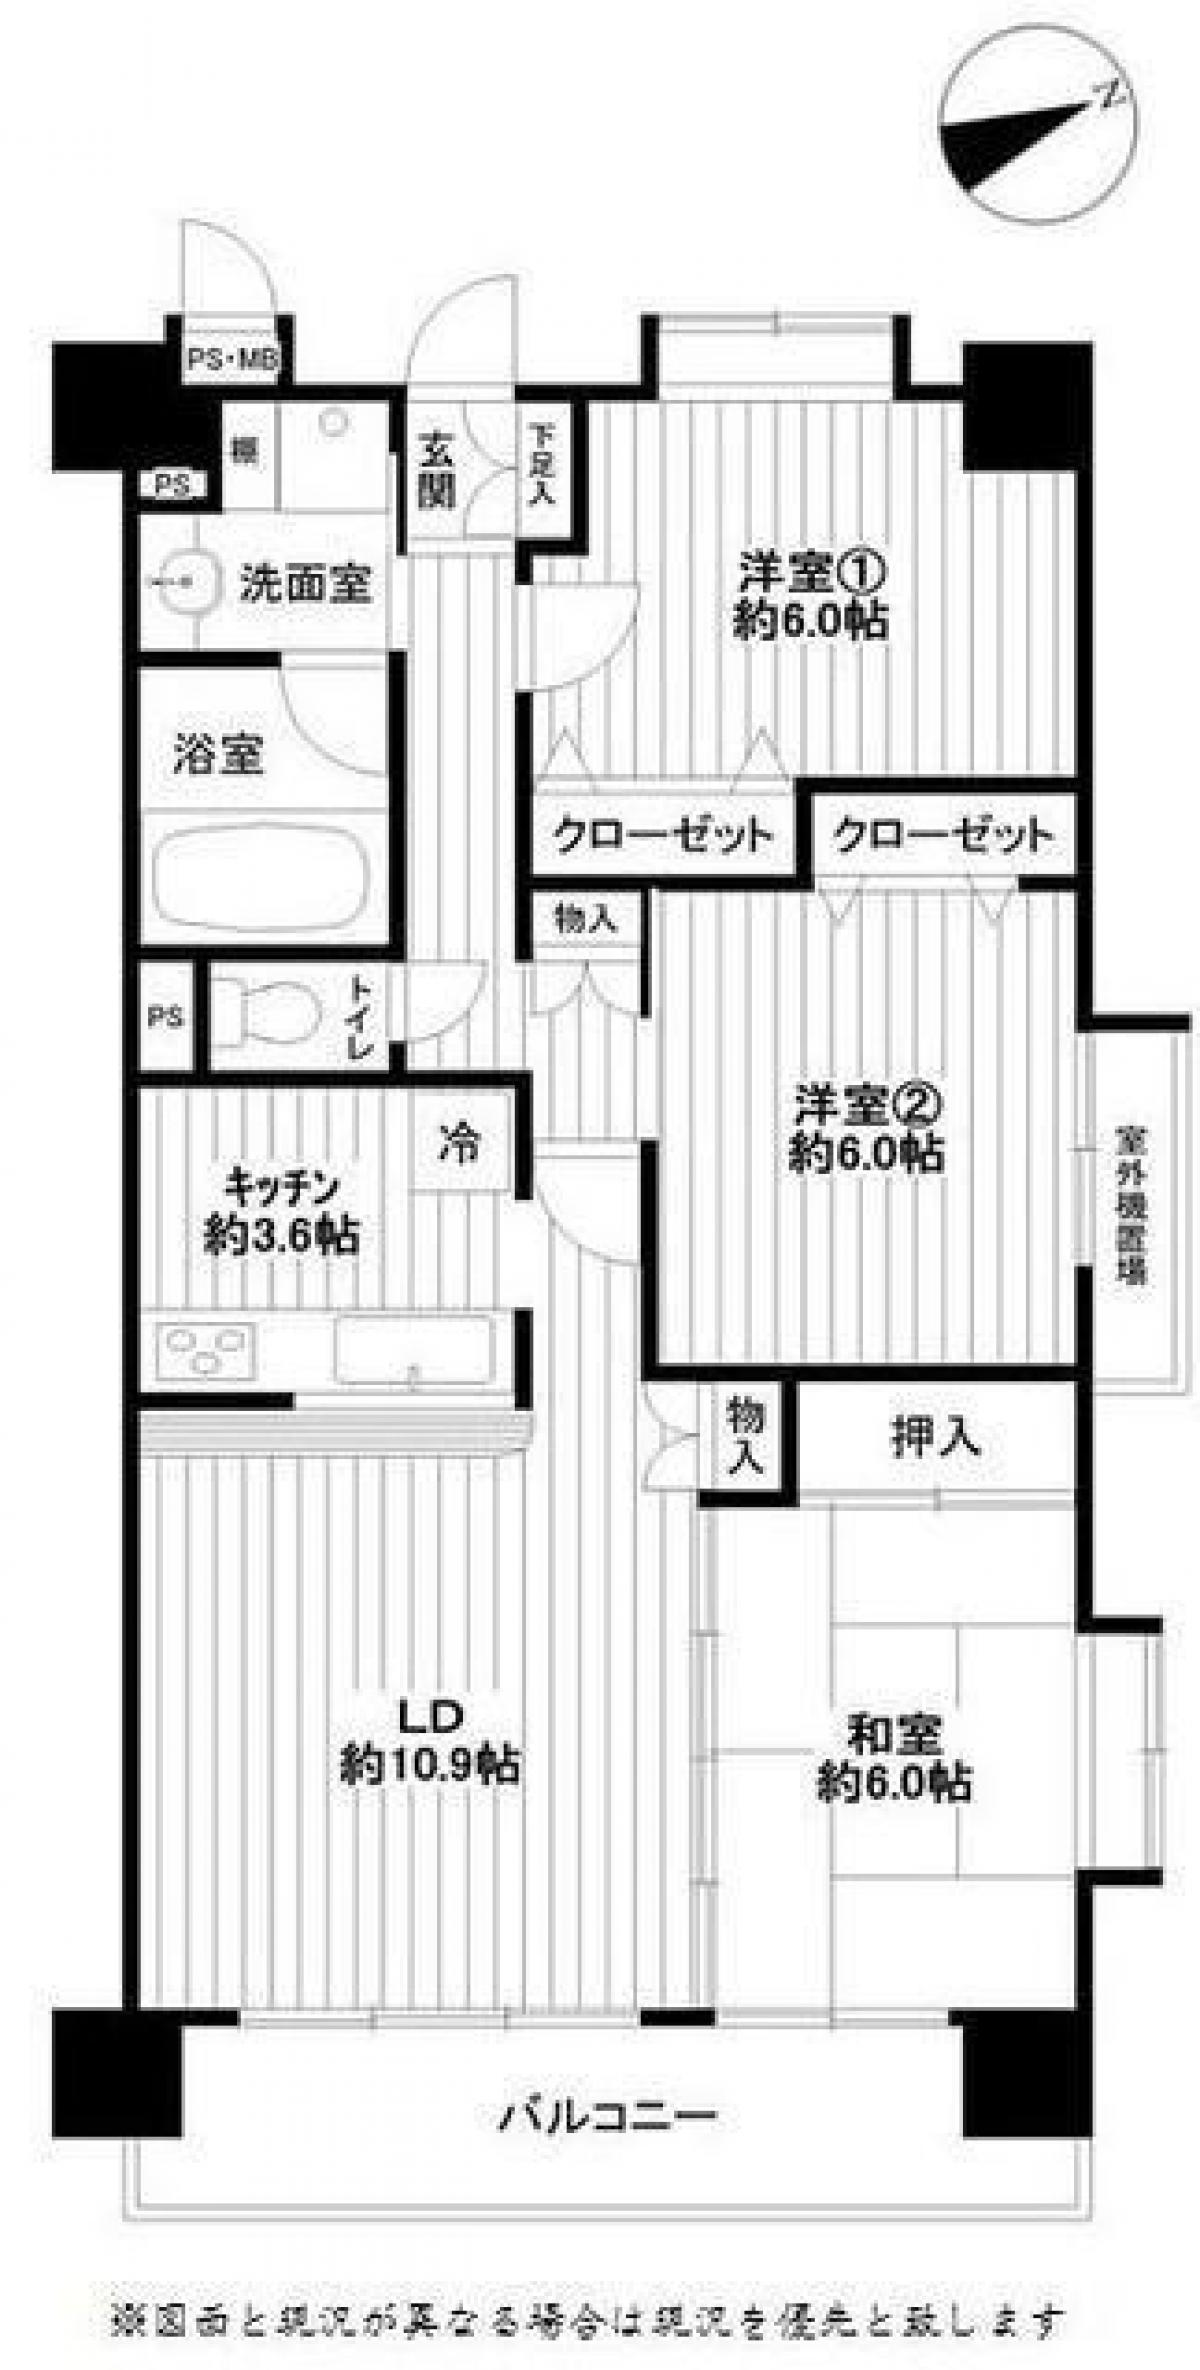 Picture of Apartment For Sale in Hanno Shi, Saitama, Japan